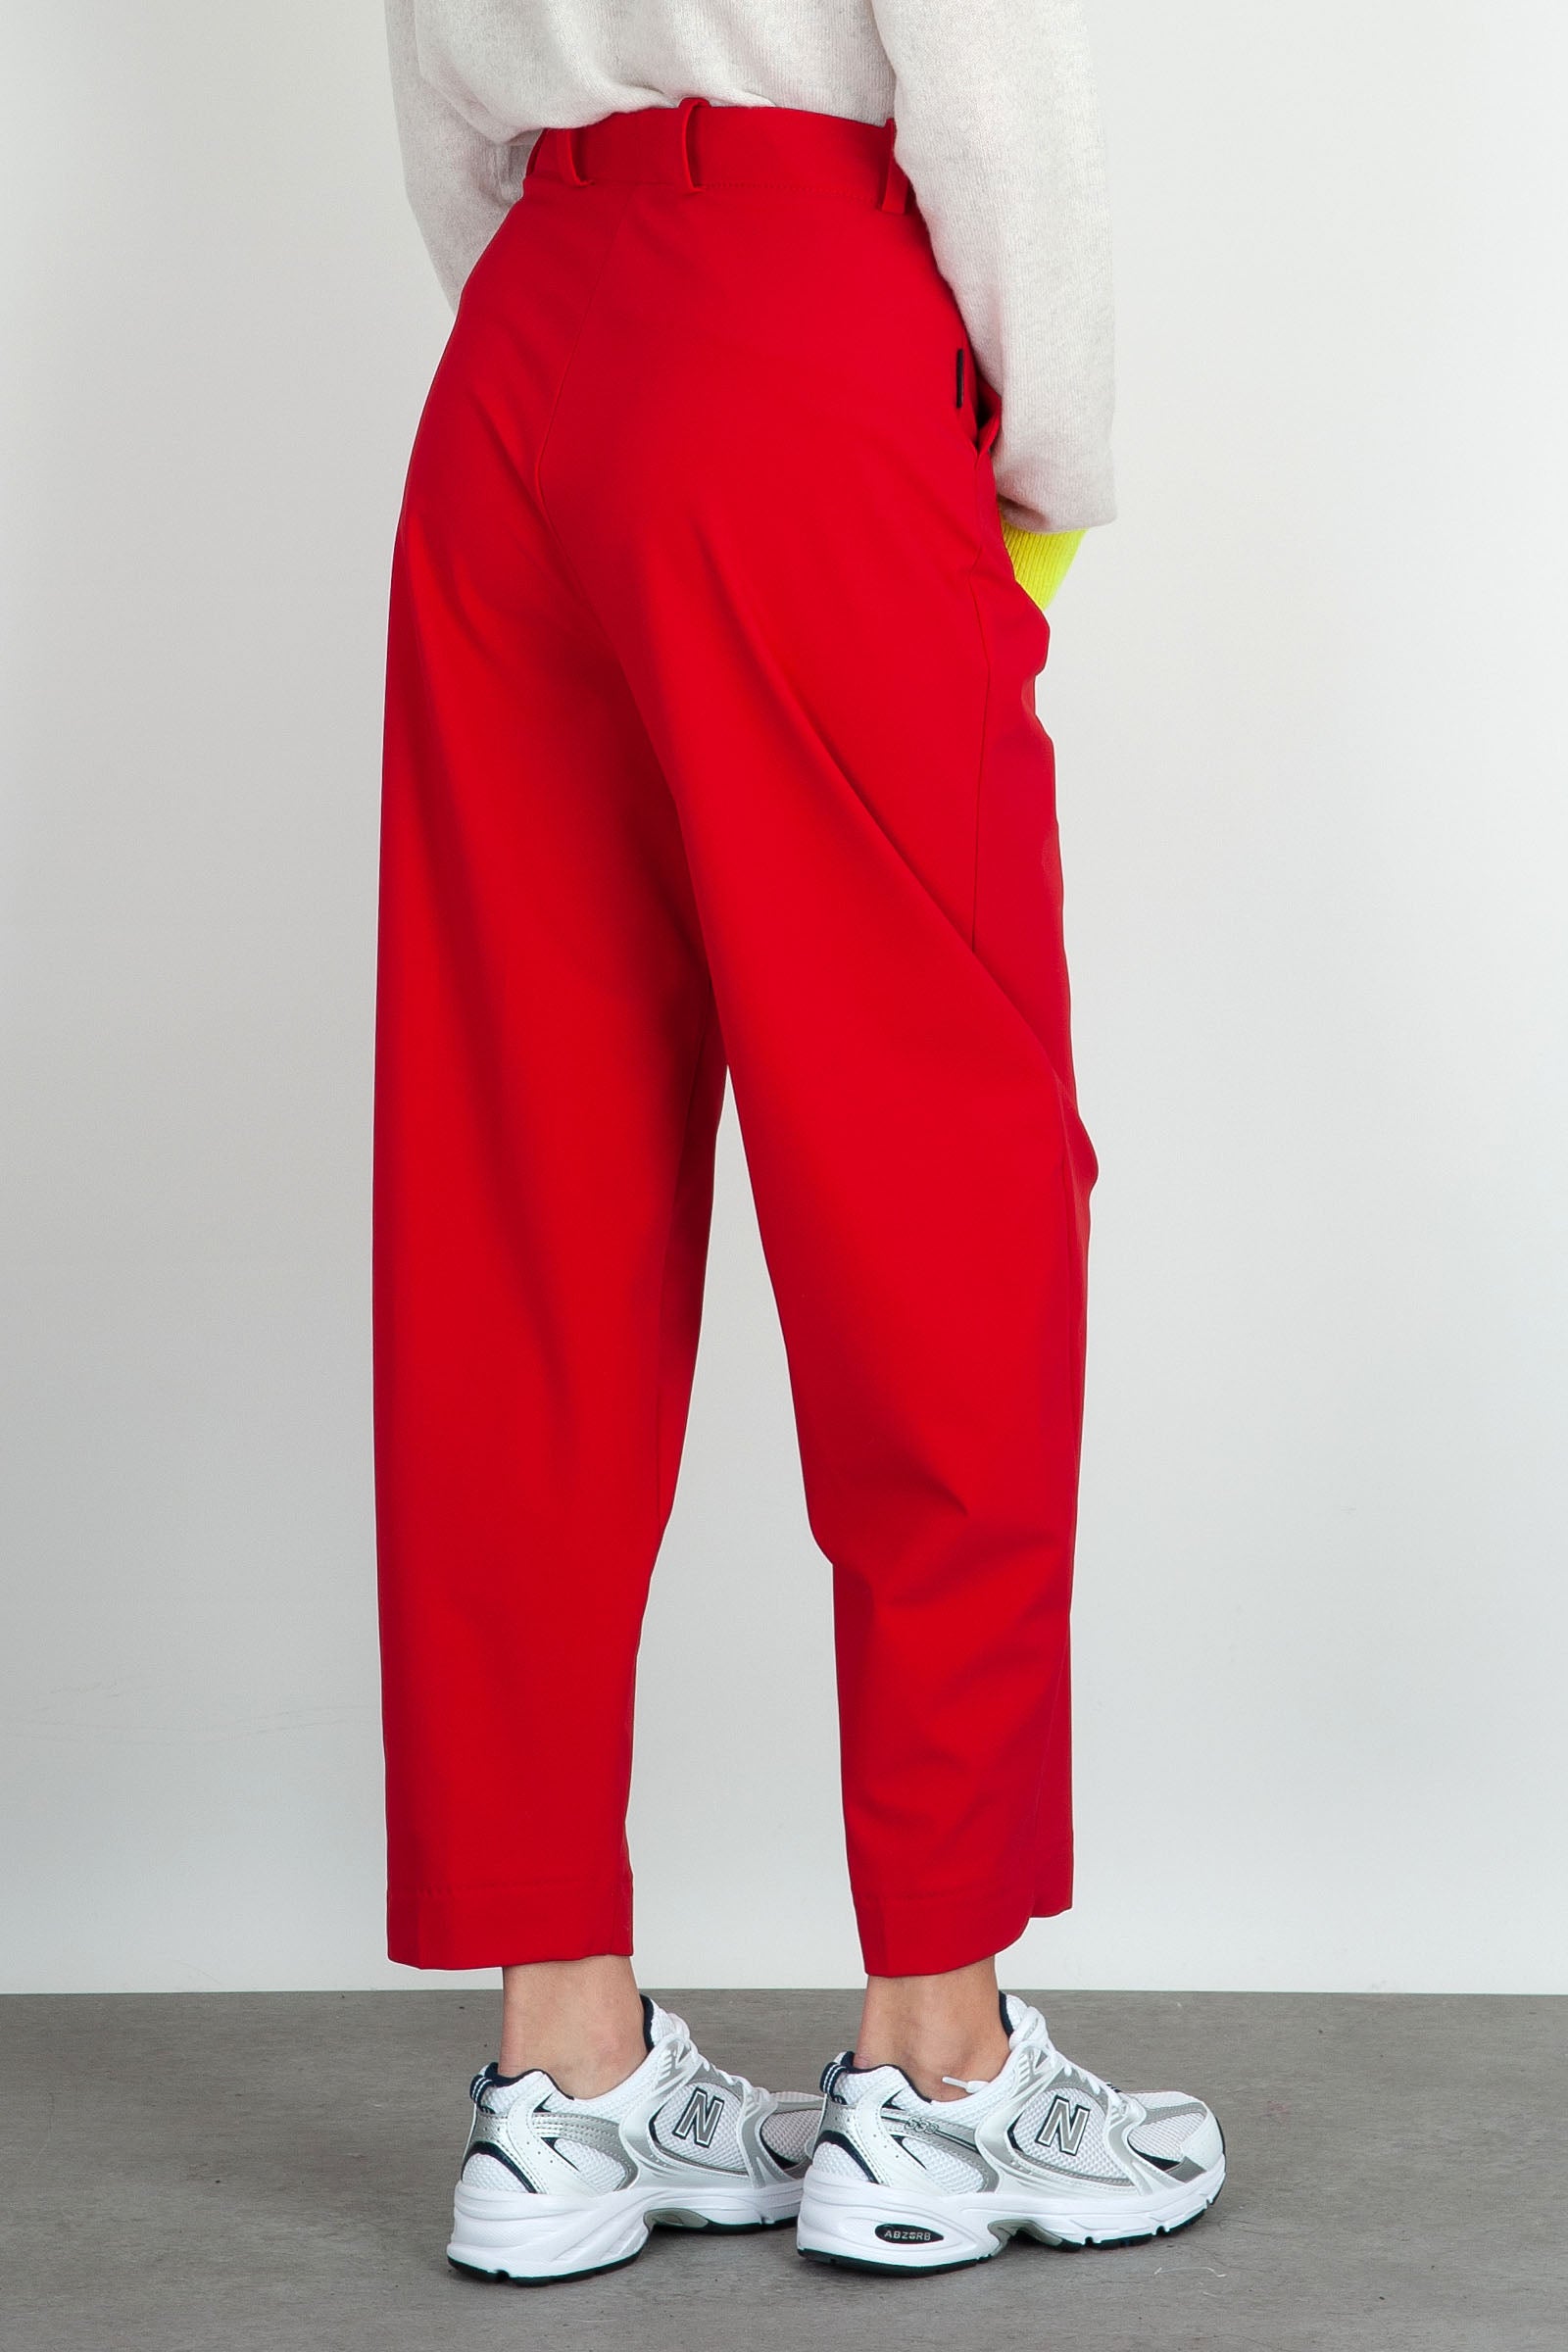 RRD Winter Joaine Trousers Red Synthetic Material - 3